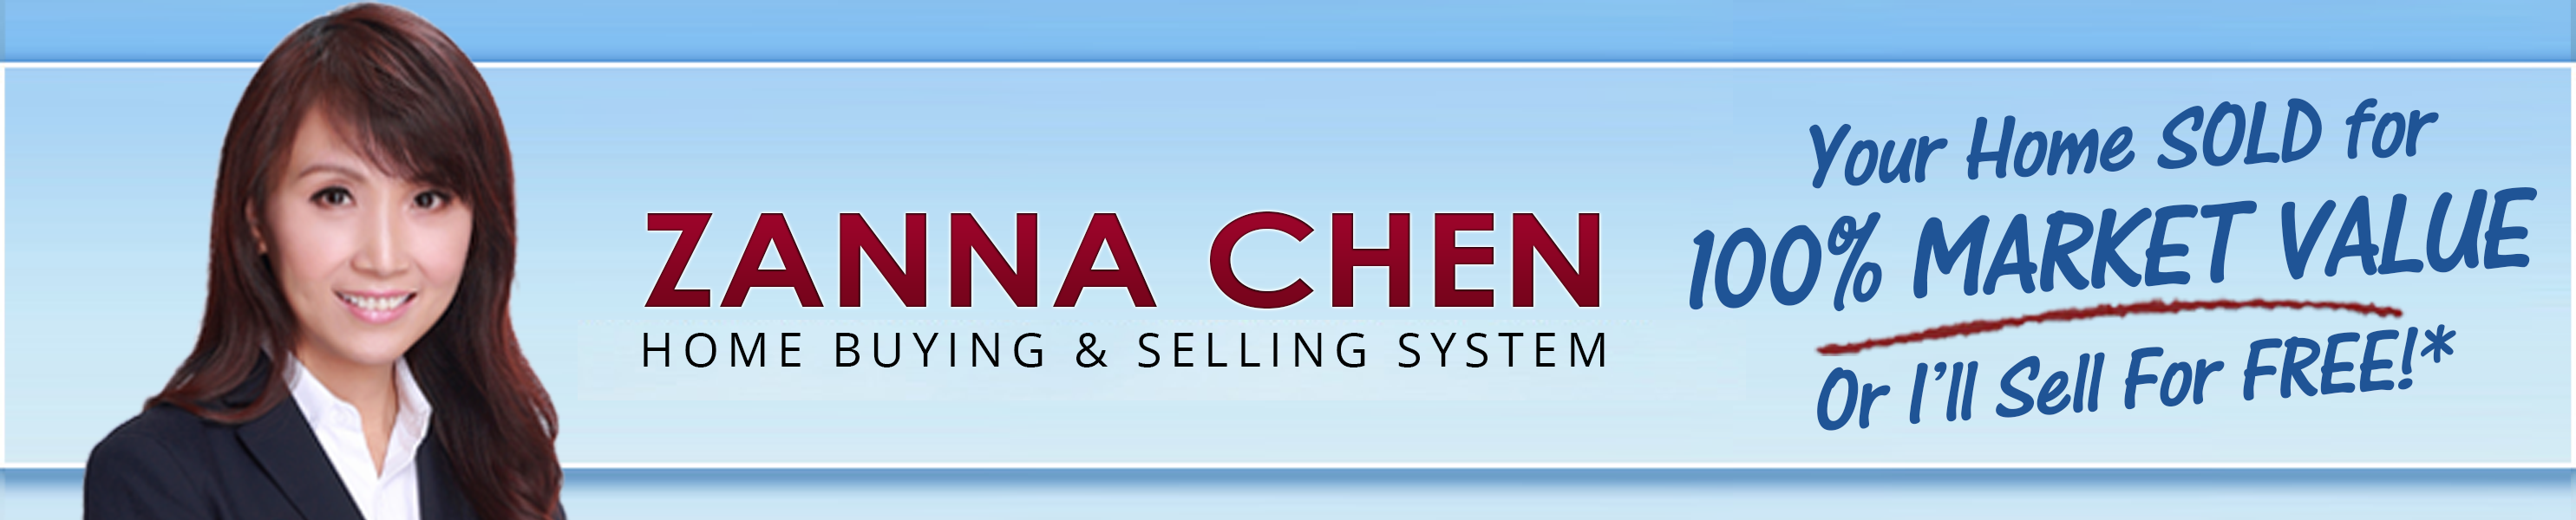 The Zanna Chen Home Buying & Selling System